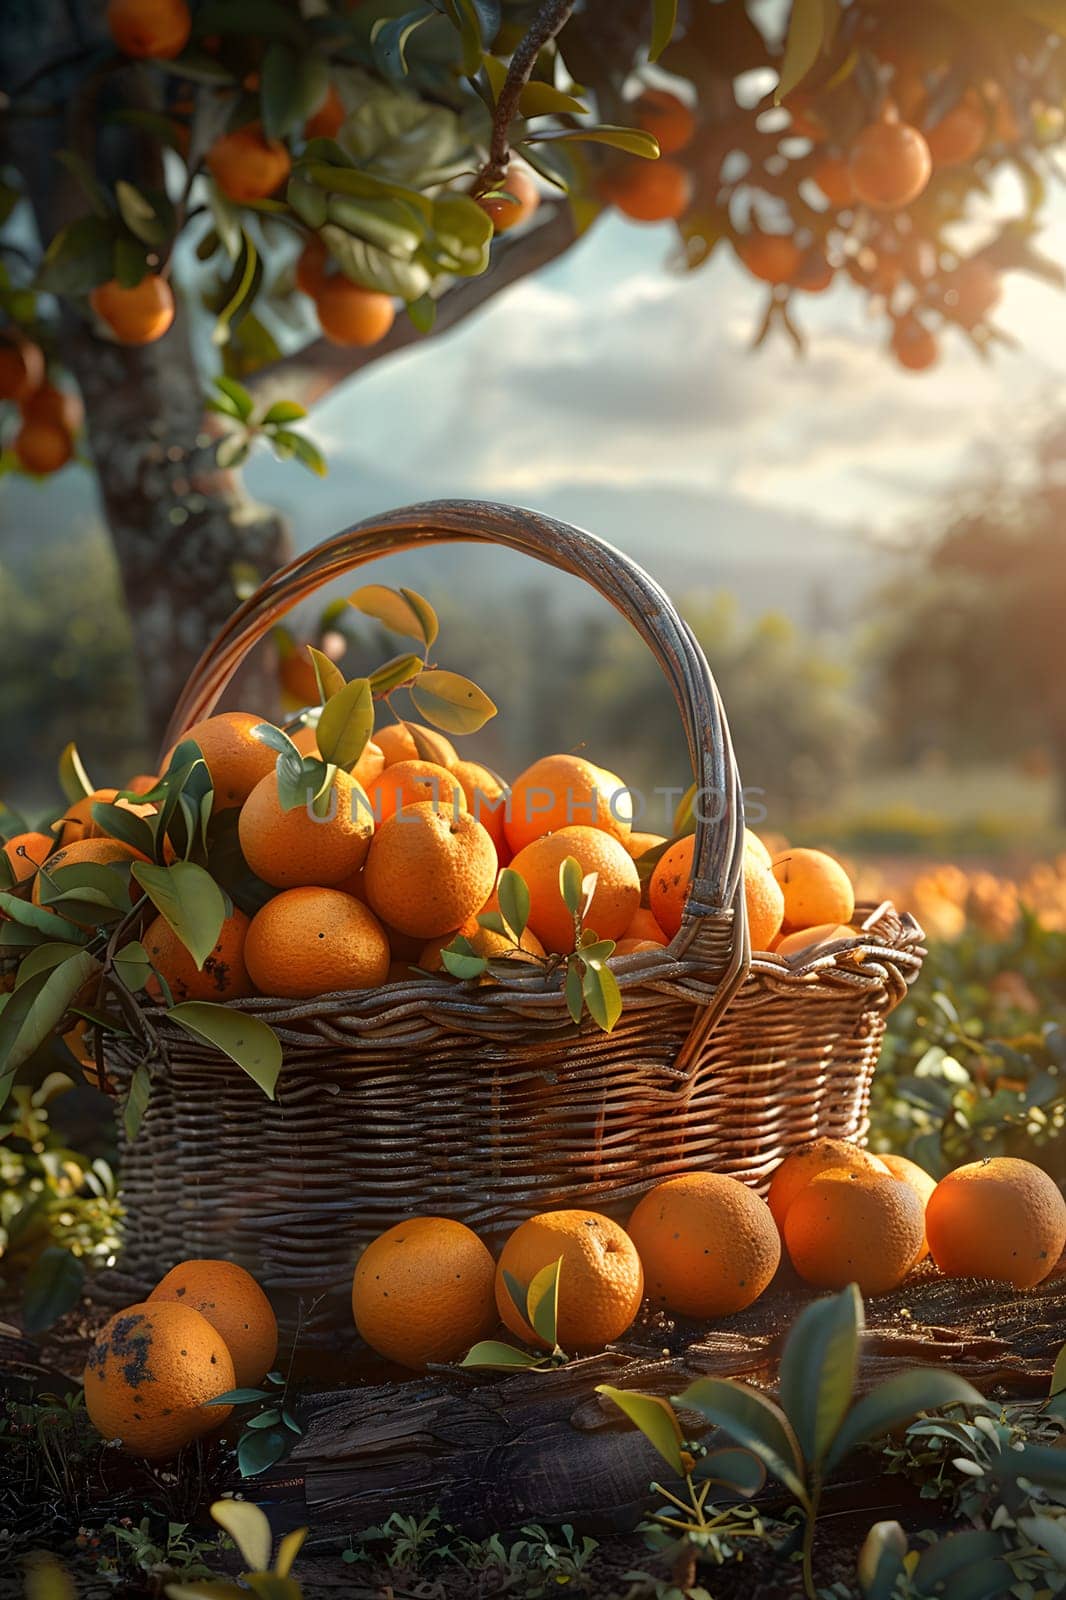 A basket filled with oranges is placed under a Rangpur orange tree. The fruit is a natural food, whole food, and produce from the plant